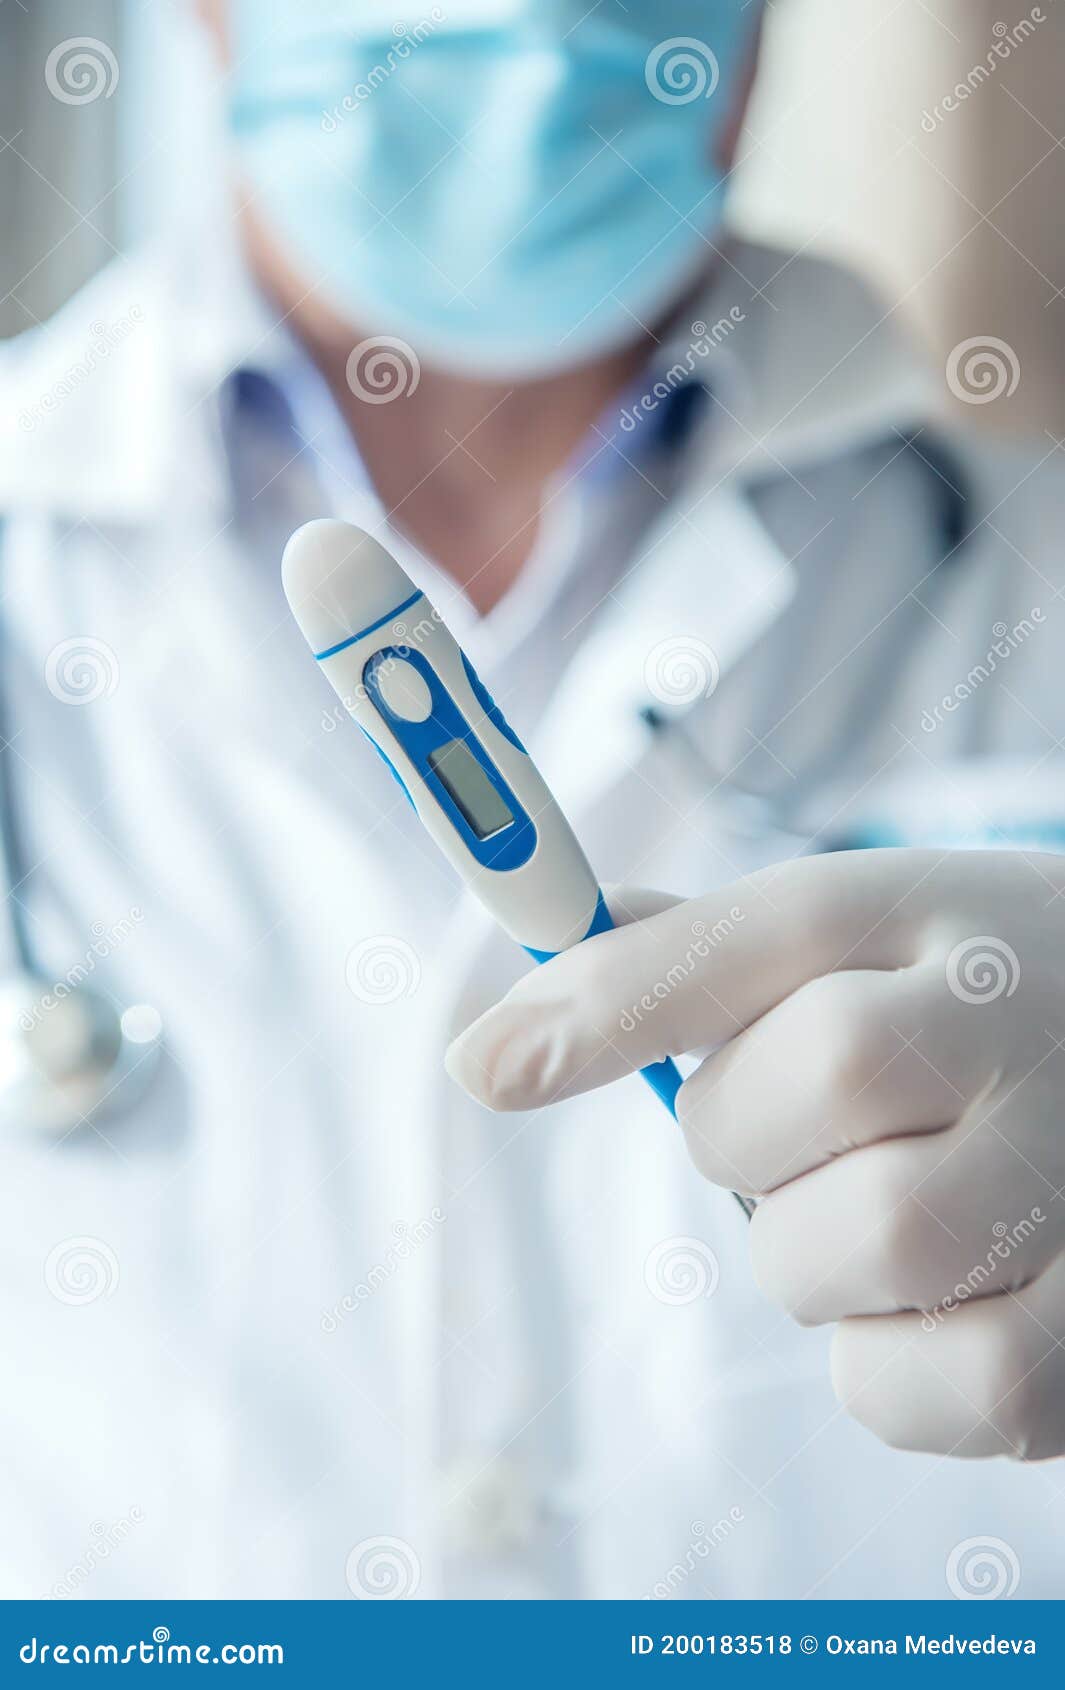 doctor gives a thermometer to measure the patient`s temperature. thermometry is important in the diagnosis of coronavirus